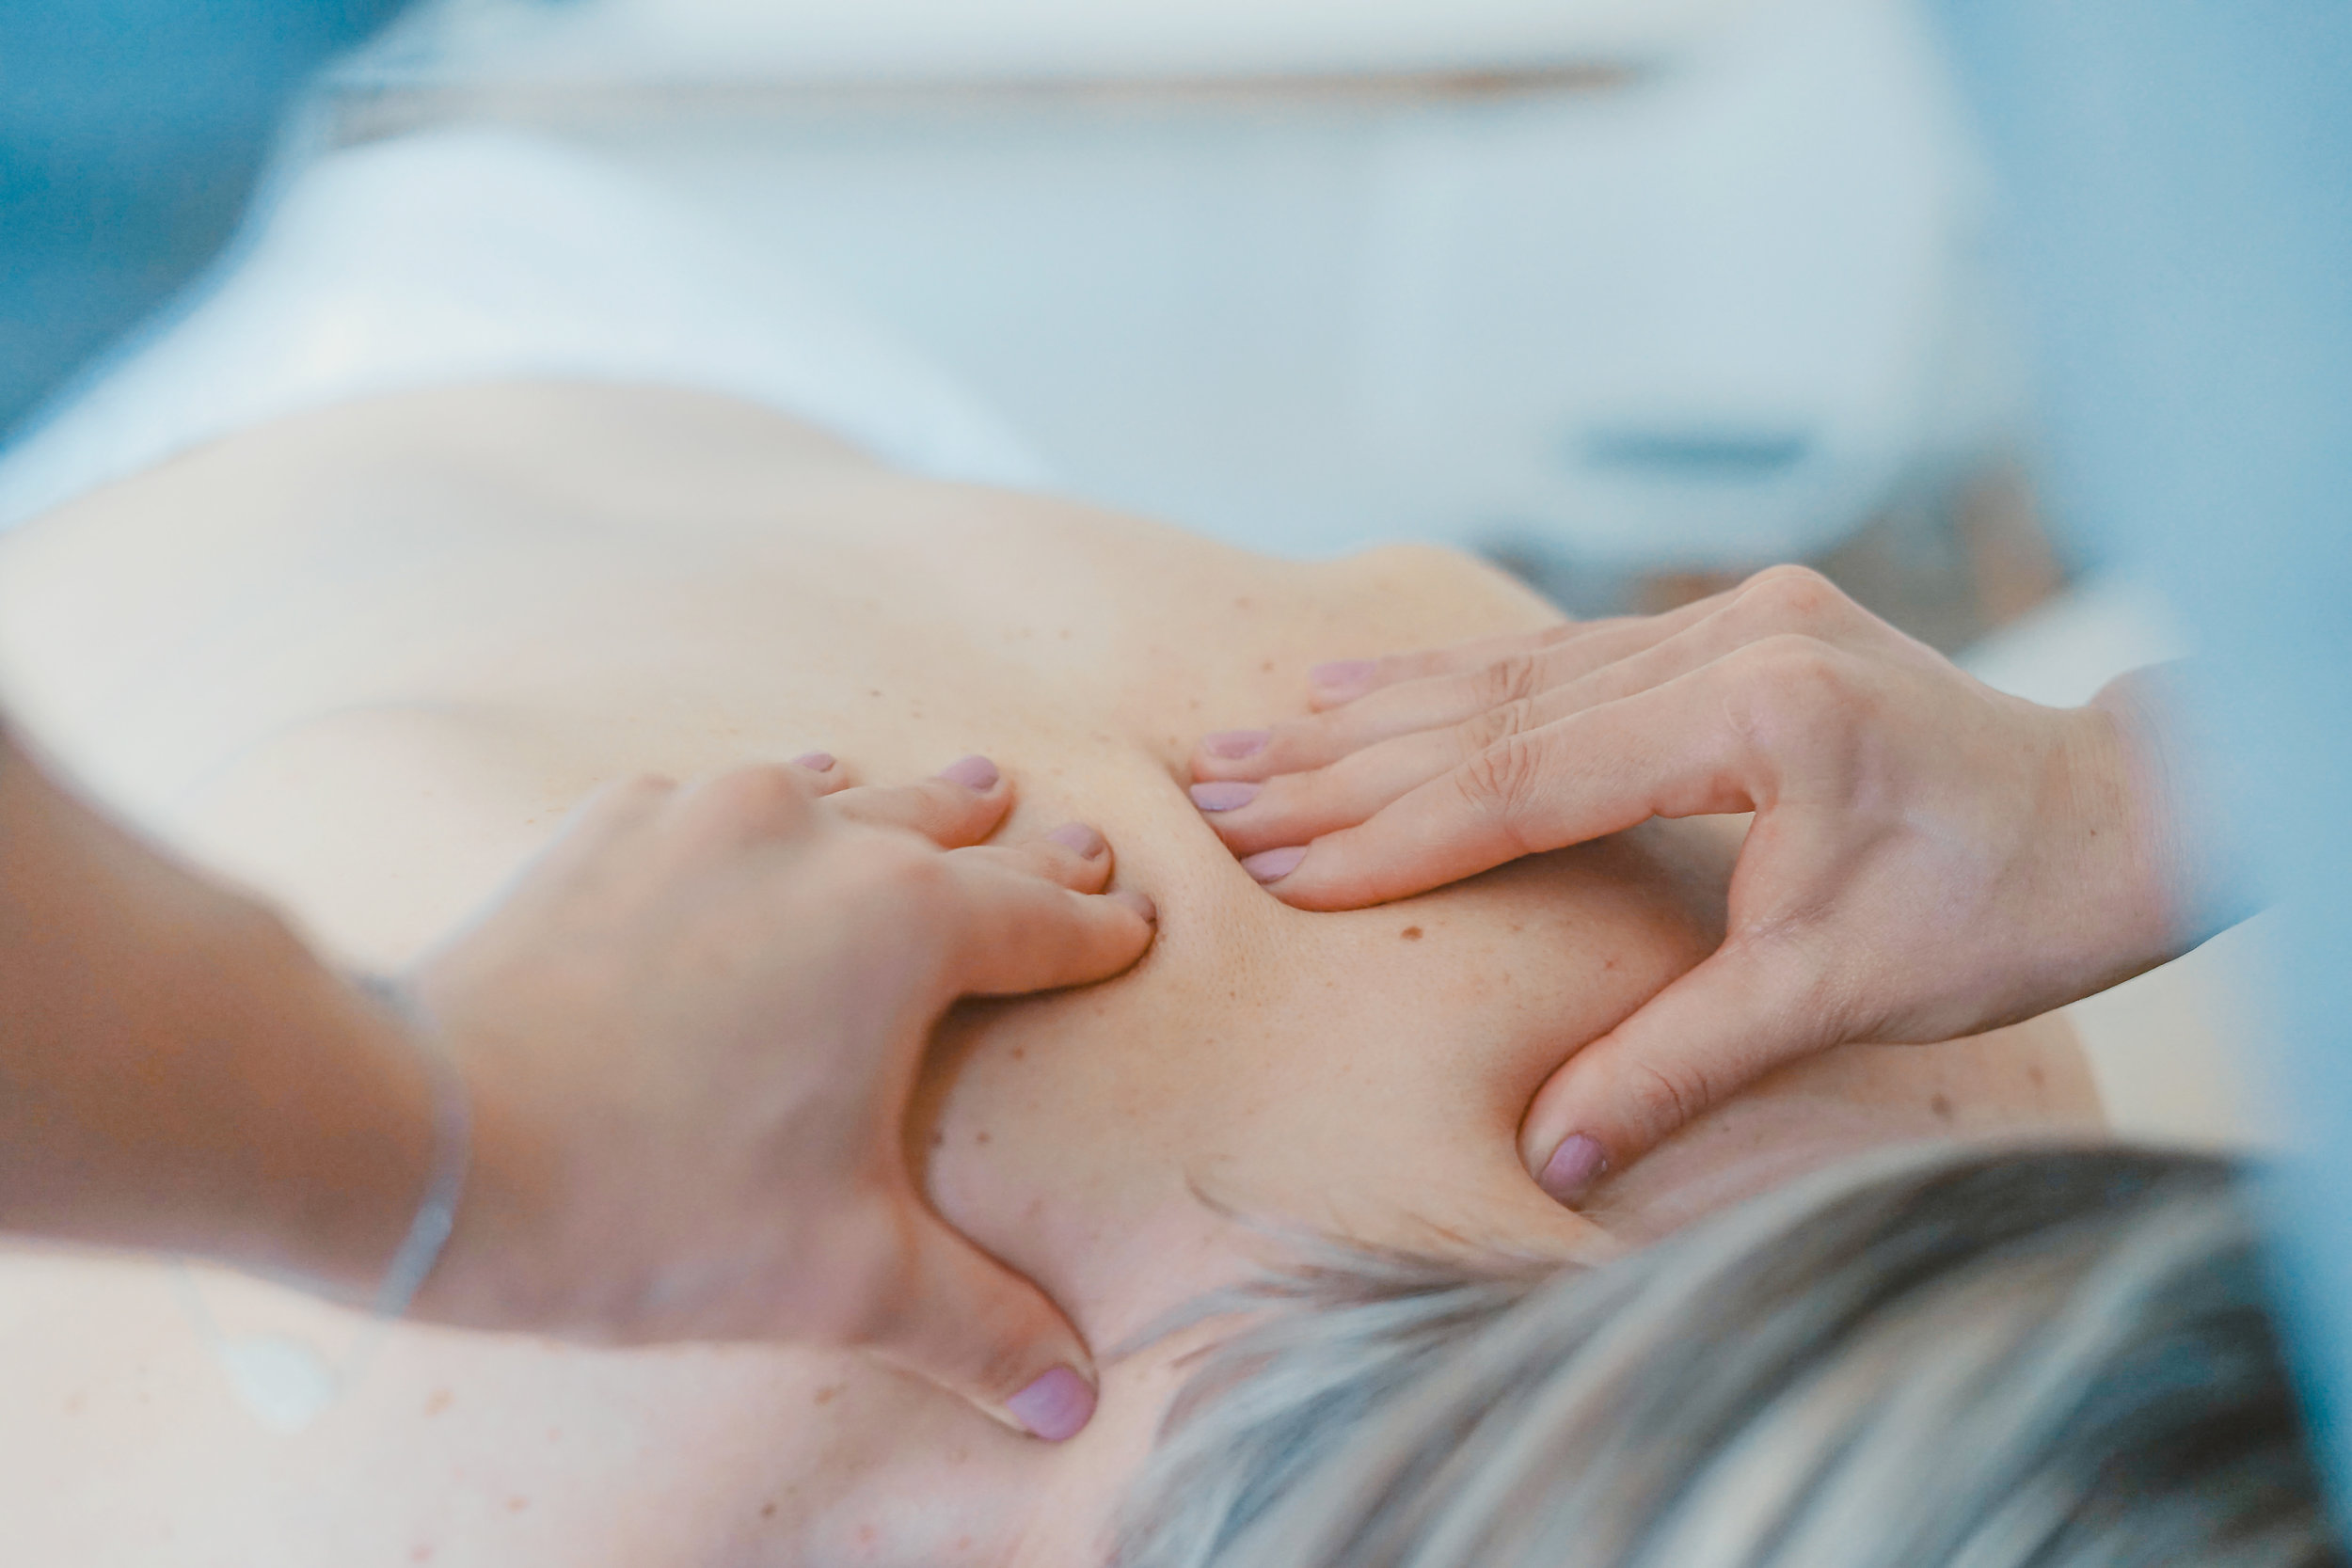 Continuing Ed for Chiropractors, Massage Therapists